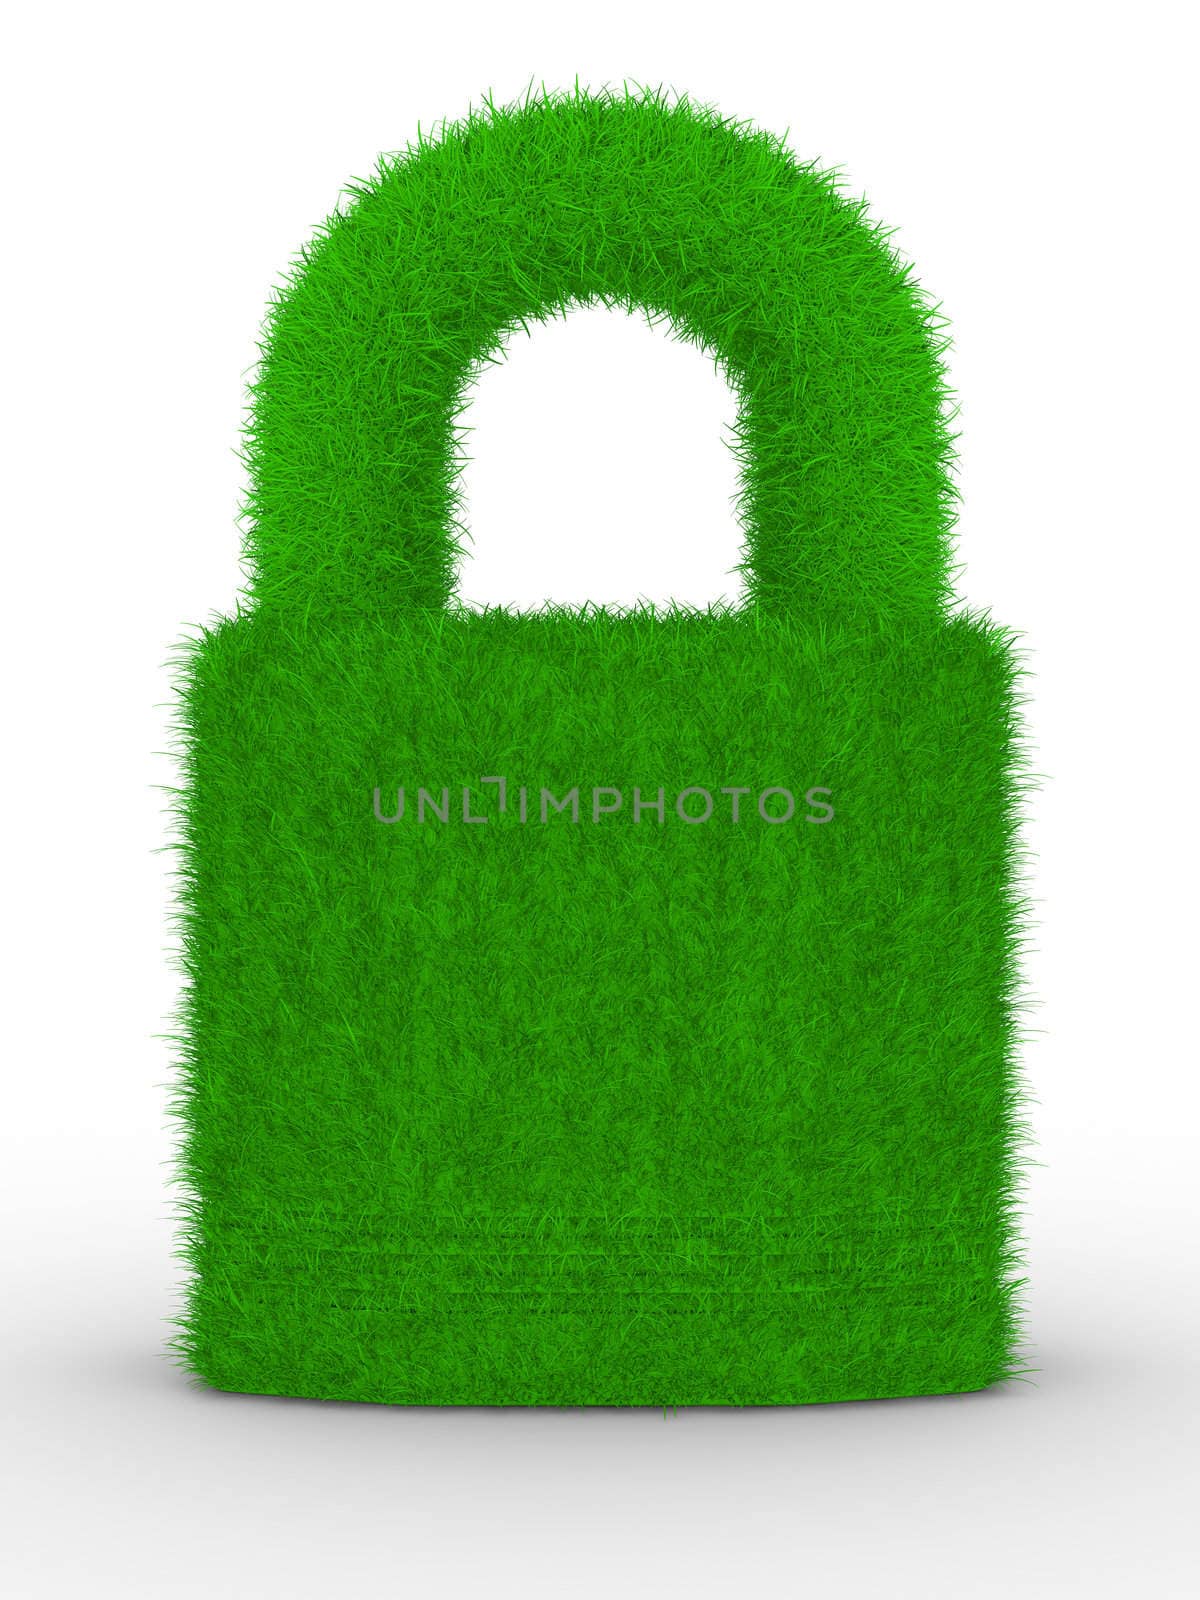 grassy closed lock on white background. Isolated 3D image